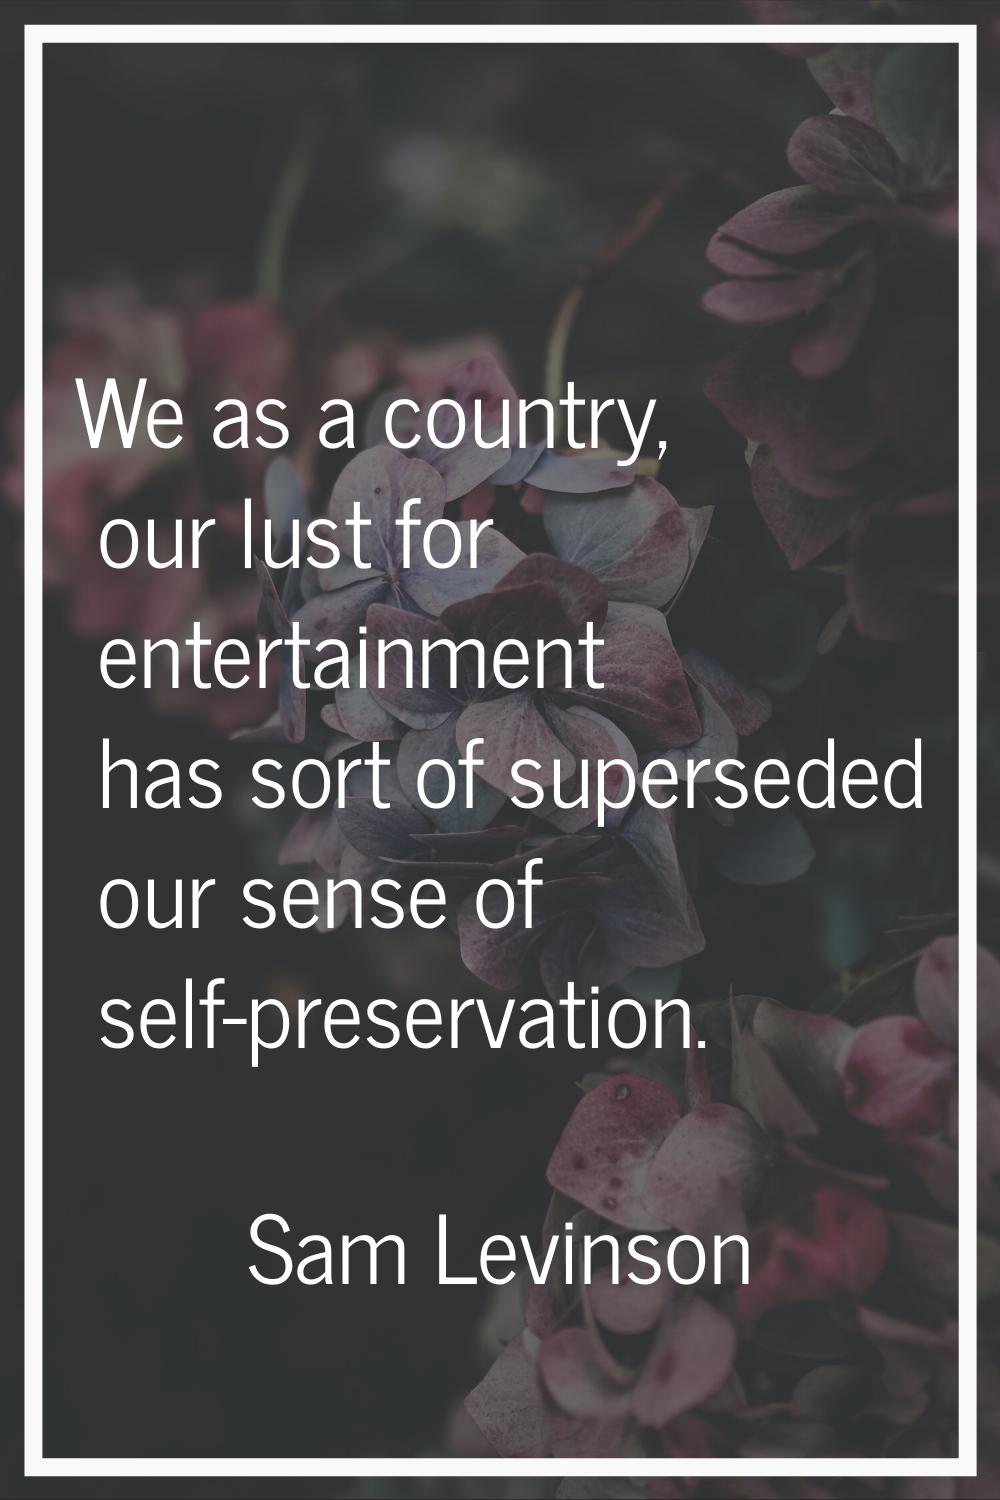 We as a country, our lust for entertainment has sort of superseded our sense of self-preservation.